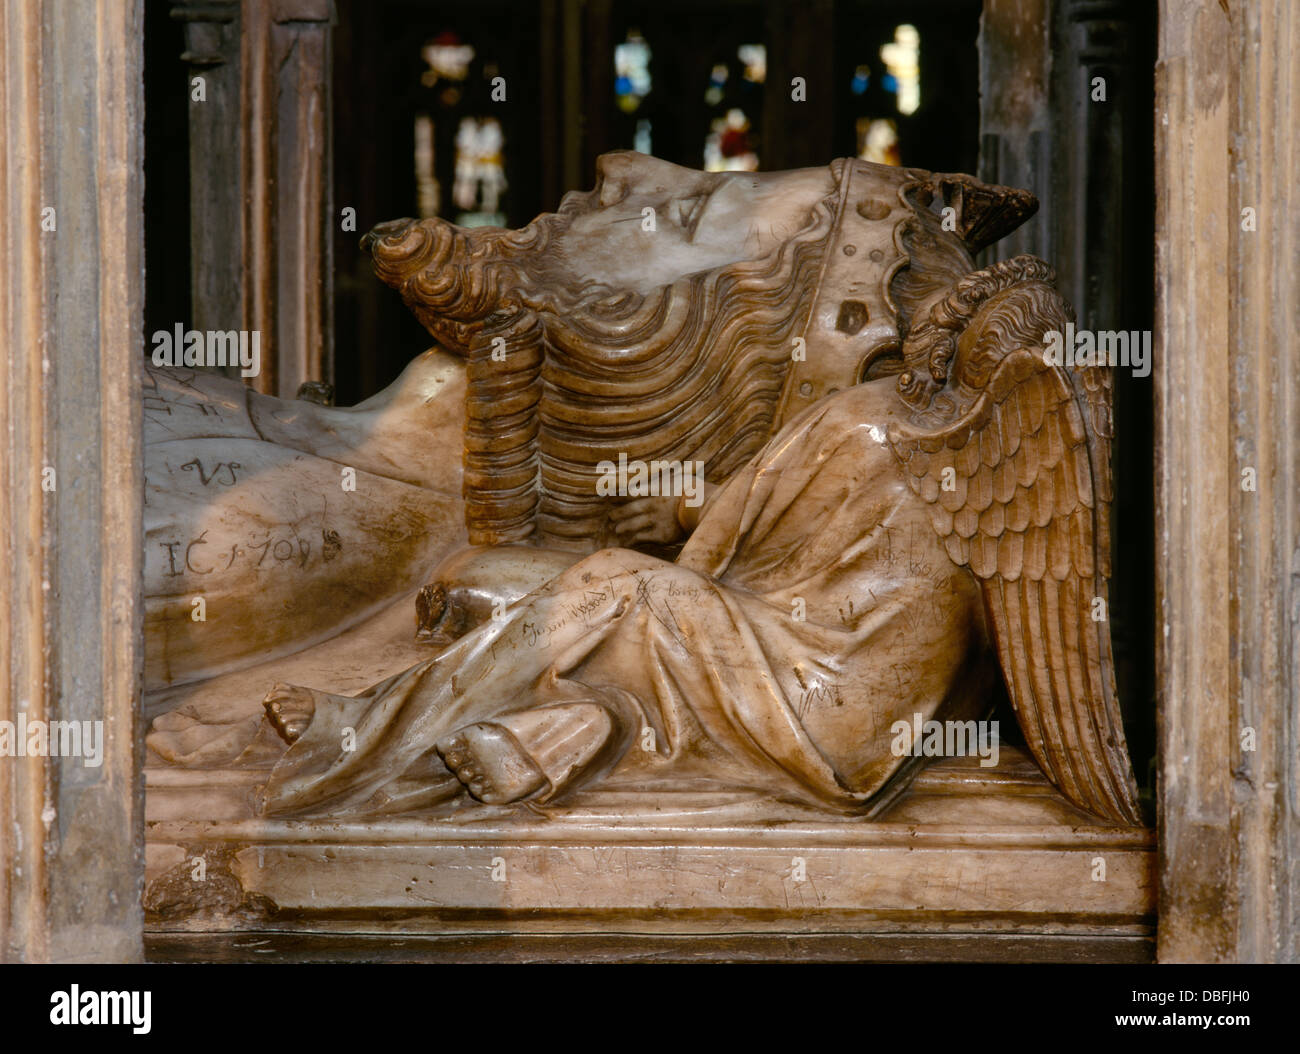 Alabaster effigy of King Edward II in the choir of Gloucester Cathedral (former abbey) England: murdered in 1327, Edward became a popular saint. Stock Photo